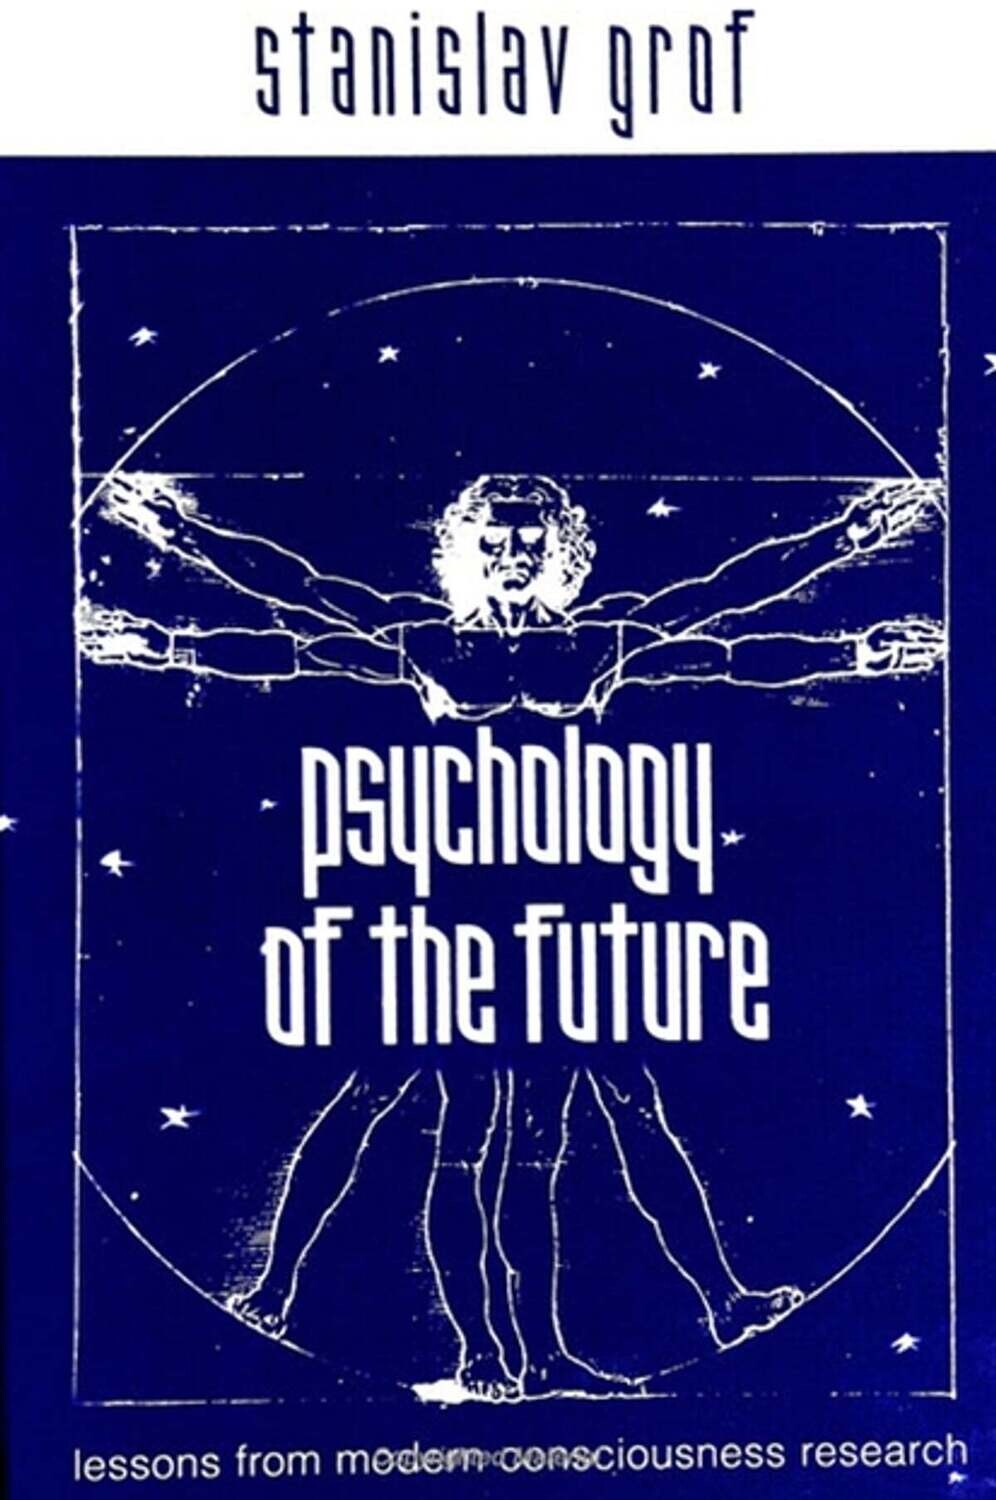 Psychology of the future* (Grof)